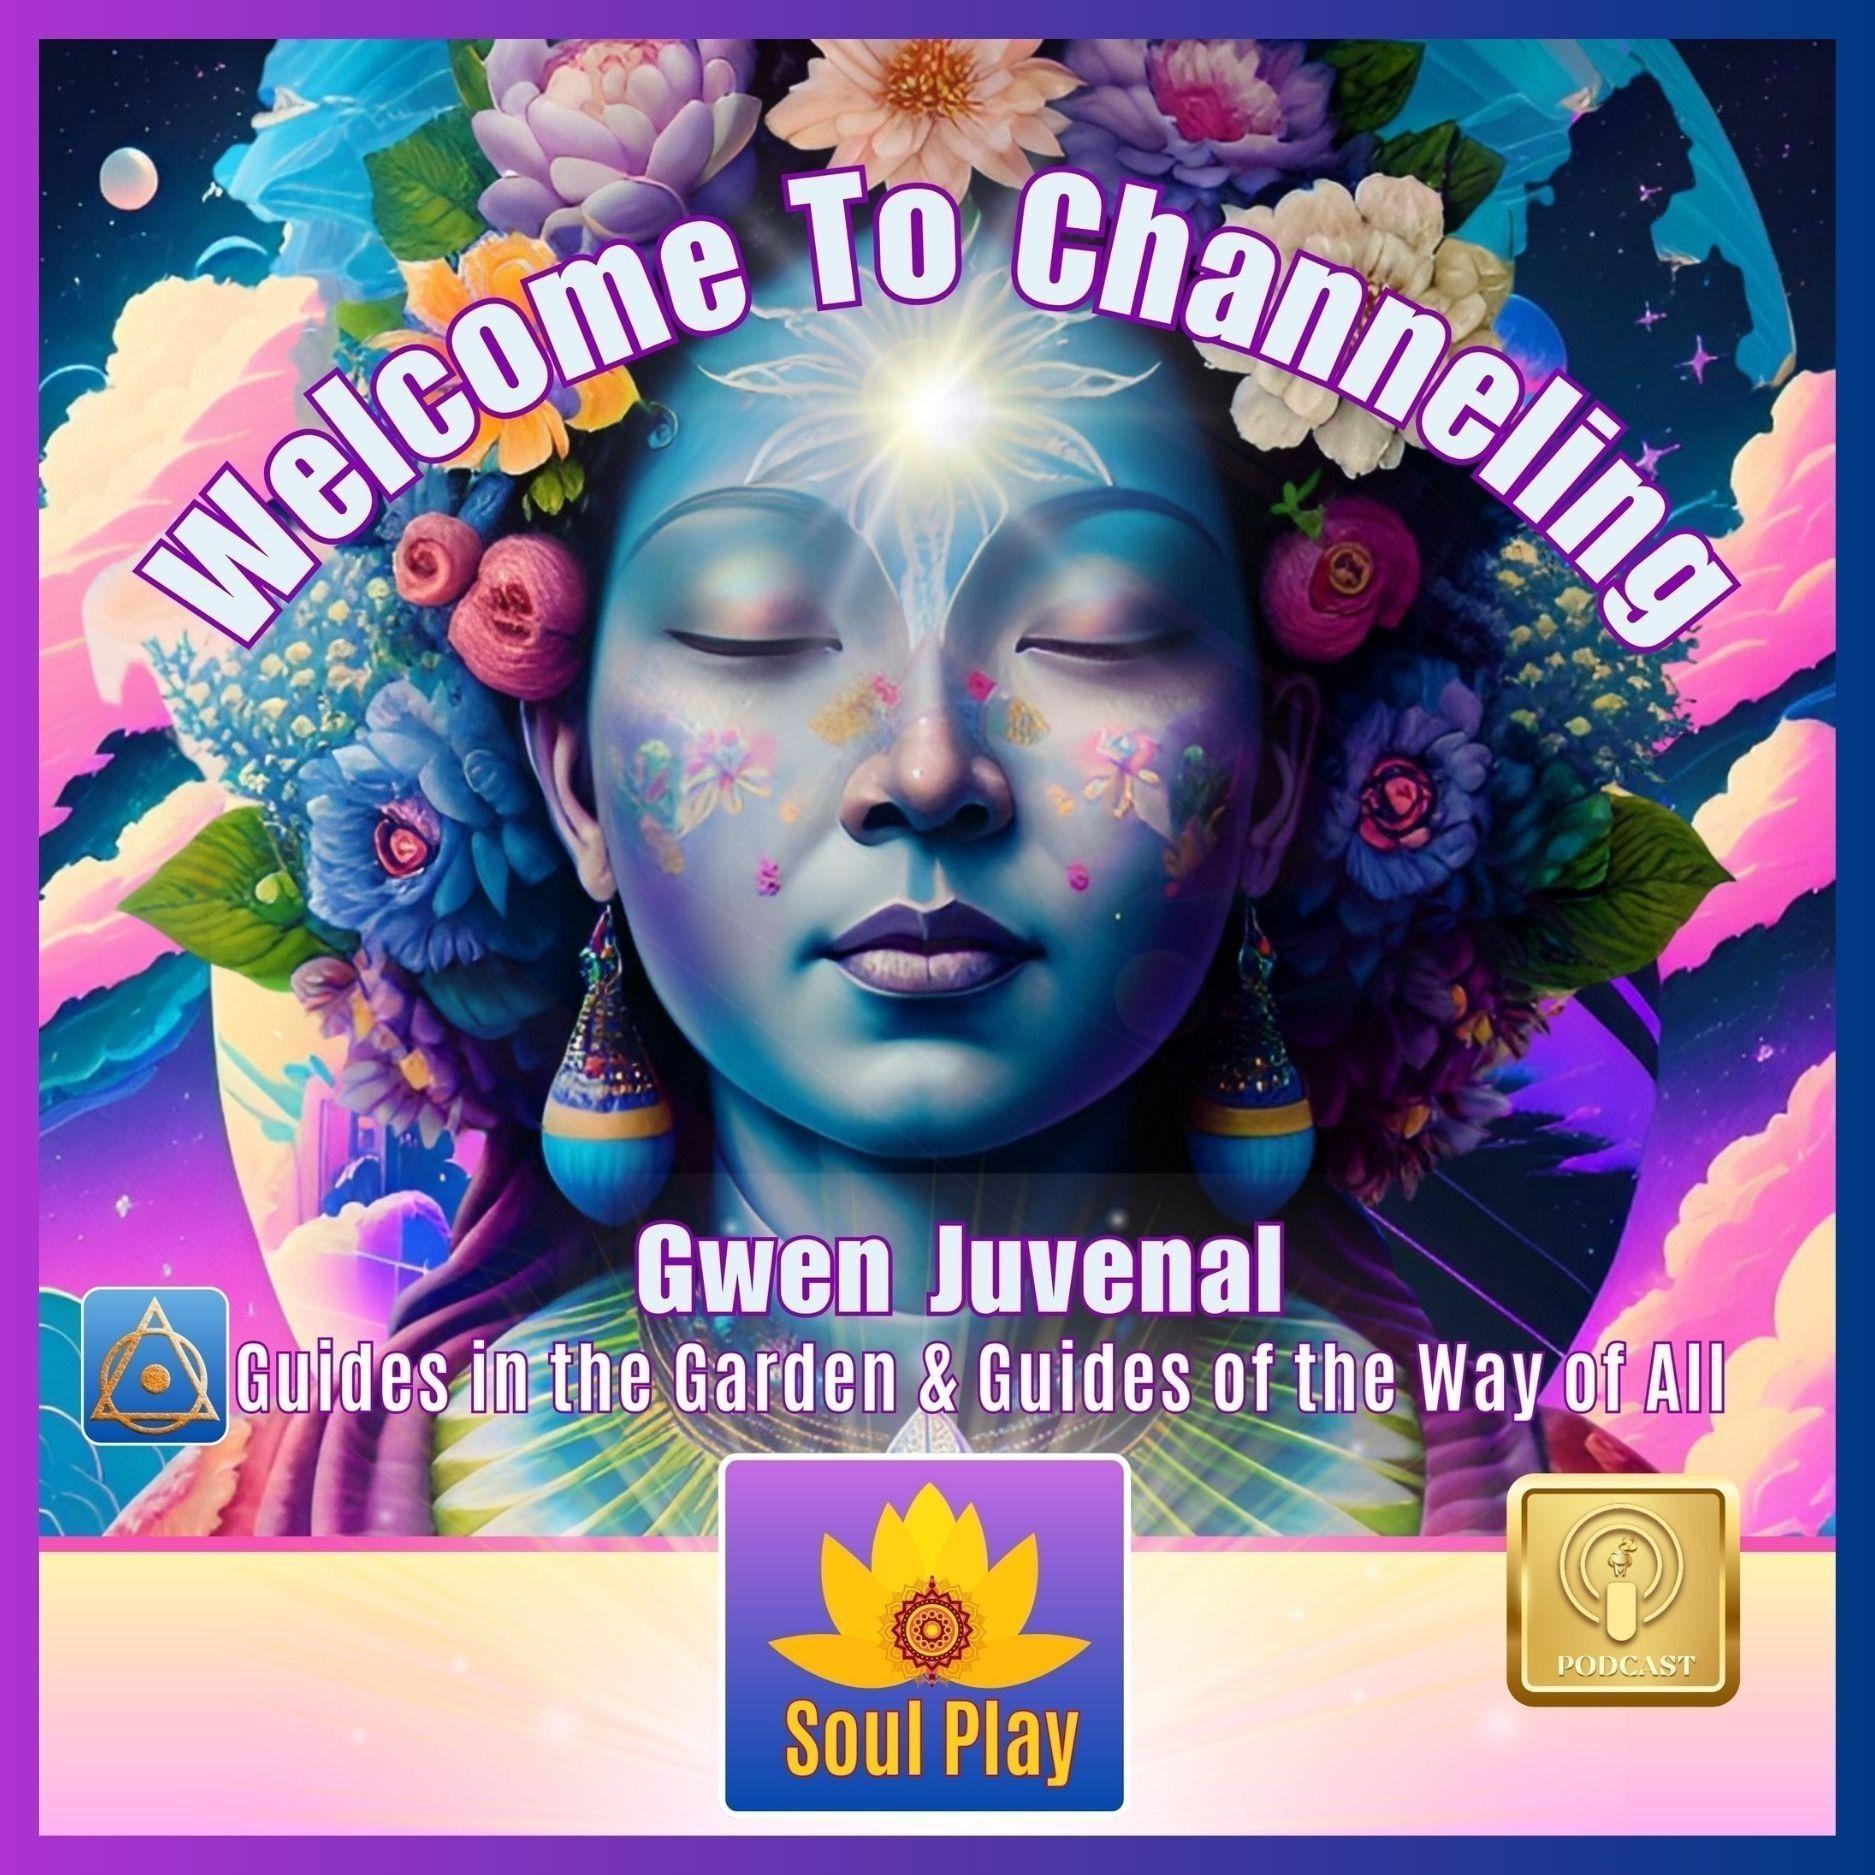 Welcome To Channeling